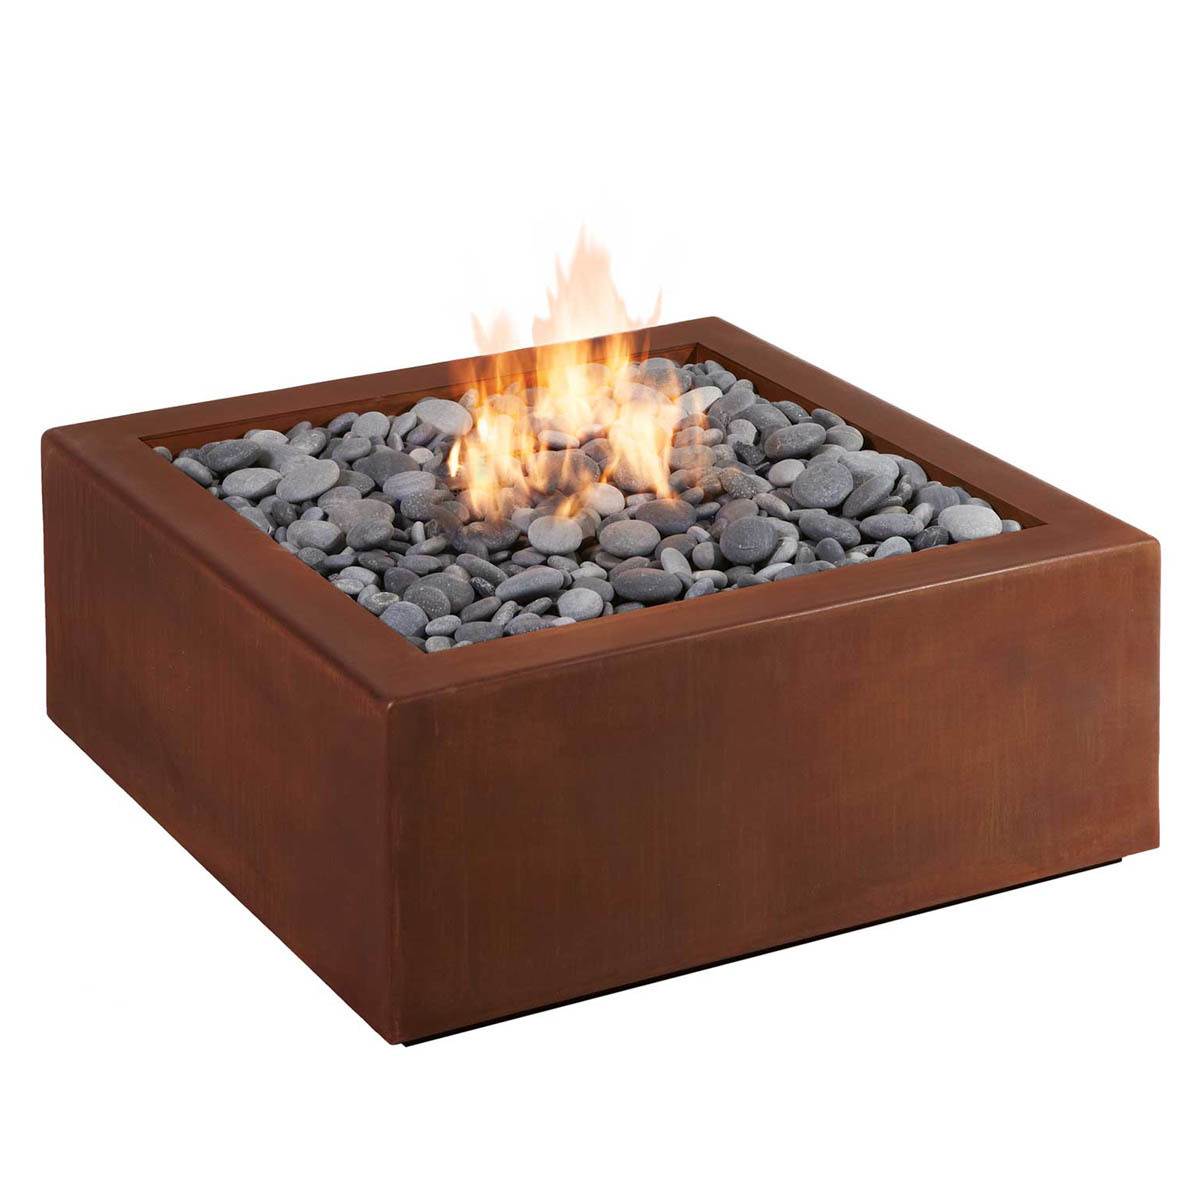 Bento Square Outdoor Fire Pit In Corten, Paloform Fire Pit